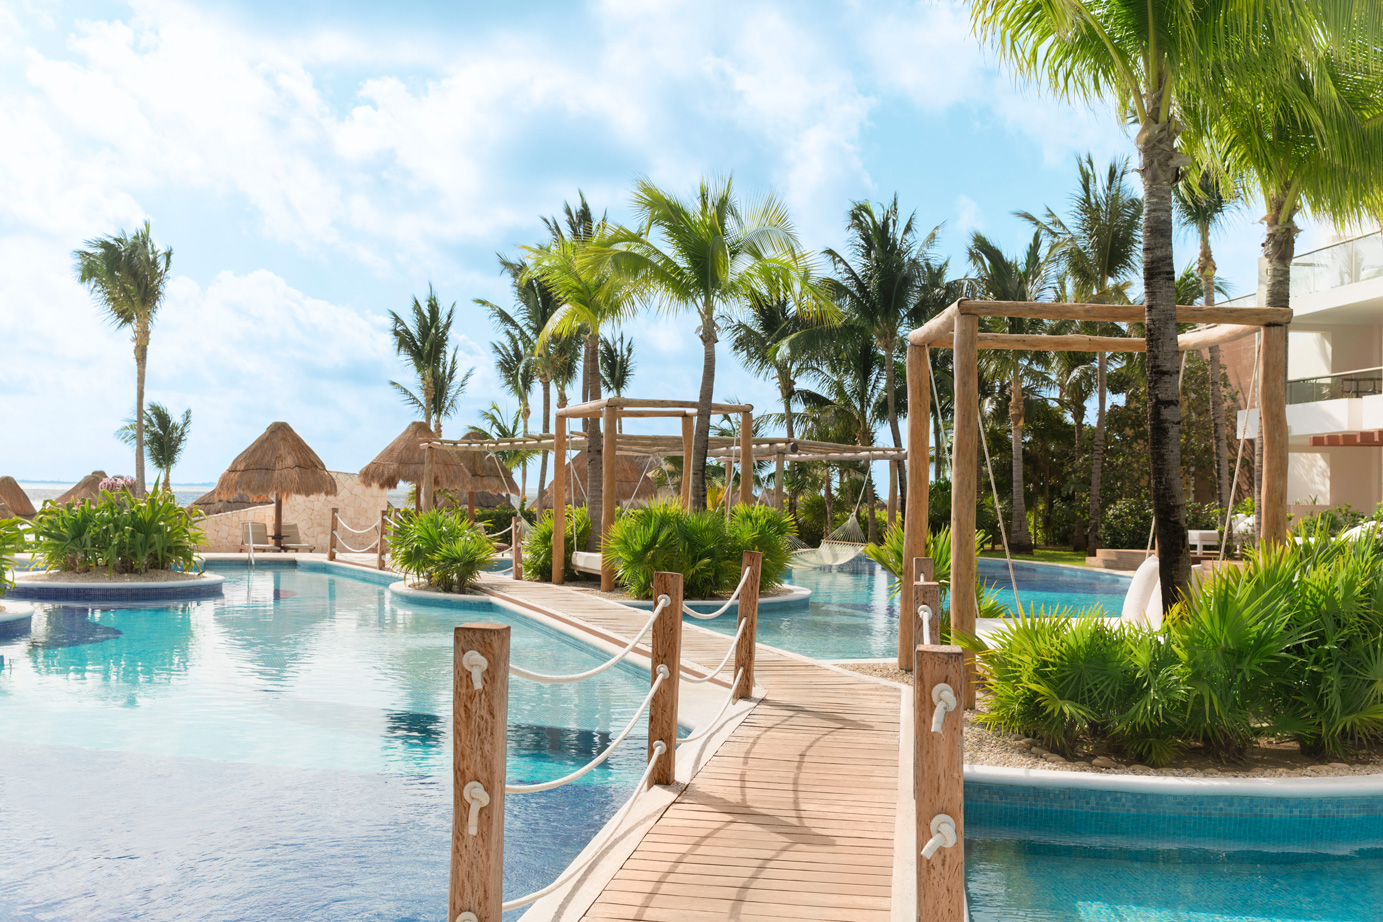 Excellence Playa Mujeres: One of the top resorts in Eastern Mexico